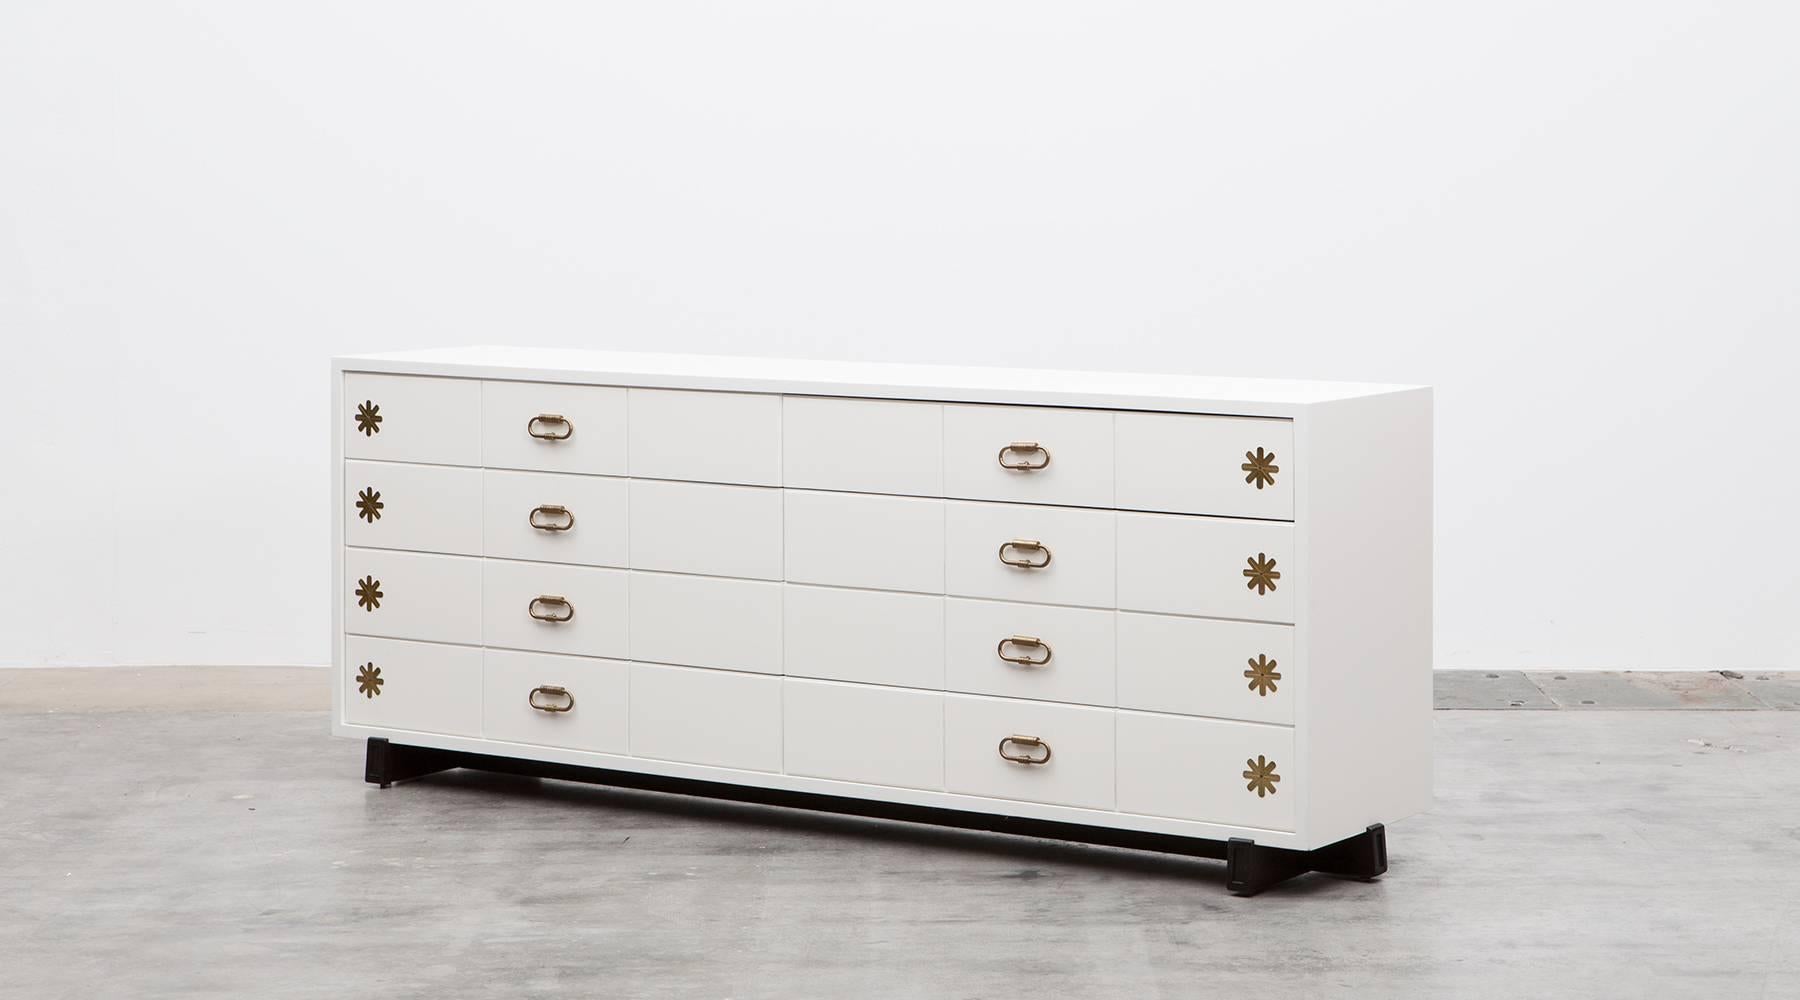 This fabulous eight-drawer sideboard designed by American Tommi Parzinger features a wooden corpus, lacquered in white, the frame is mahogany and the special handles and decorative details comes in brass. Simply one of the finest pieces by this